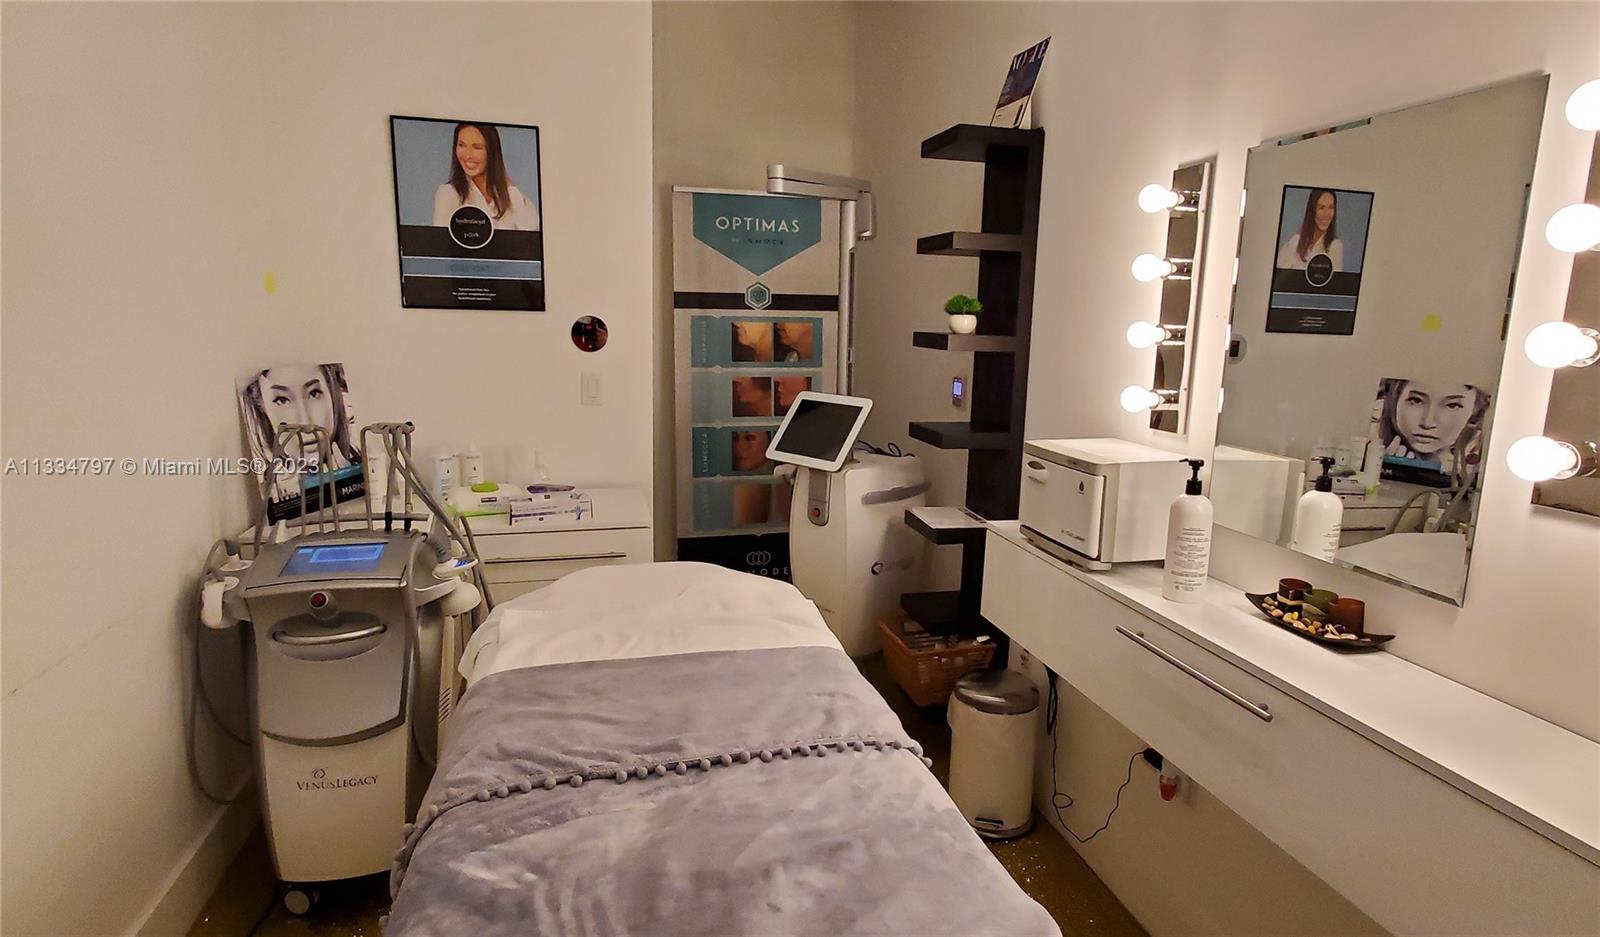   LUXURY MEDICAL BEAUTY SPA  For Sale A11334797, FL